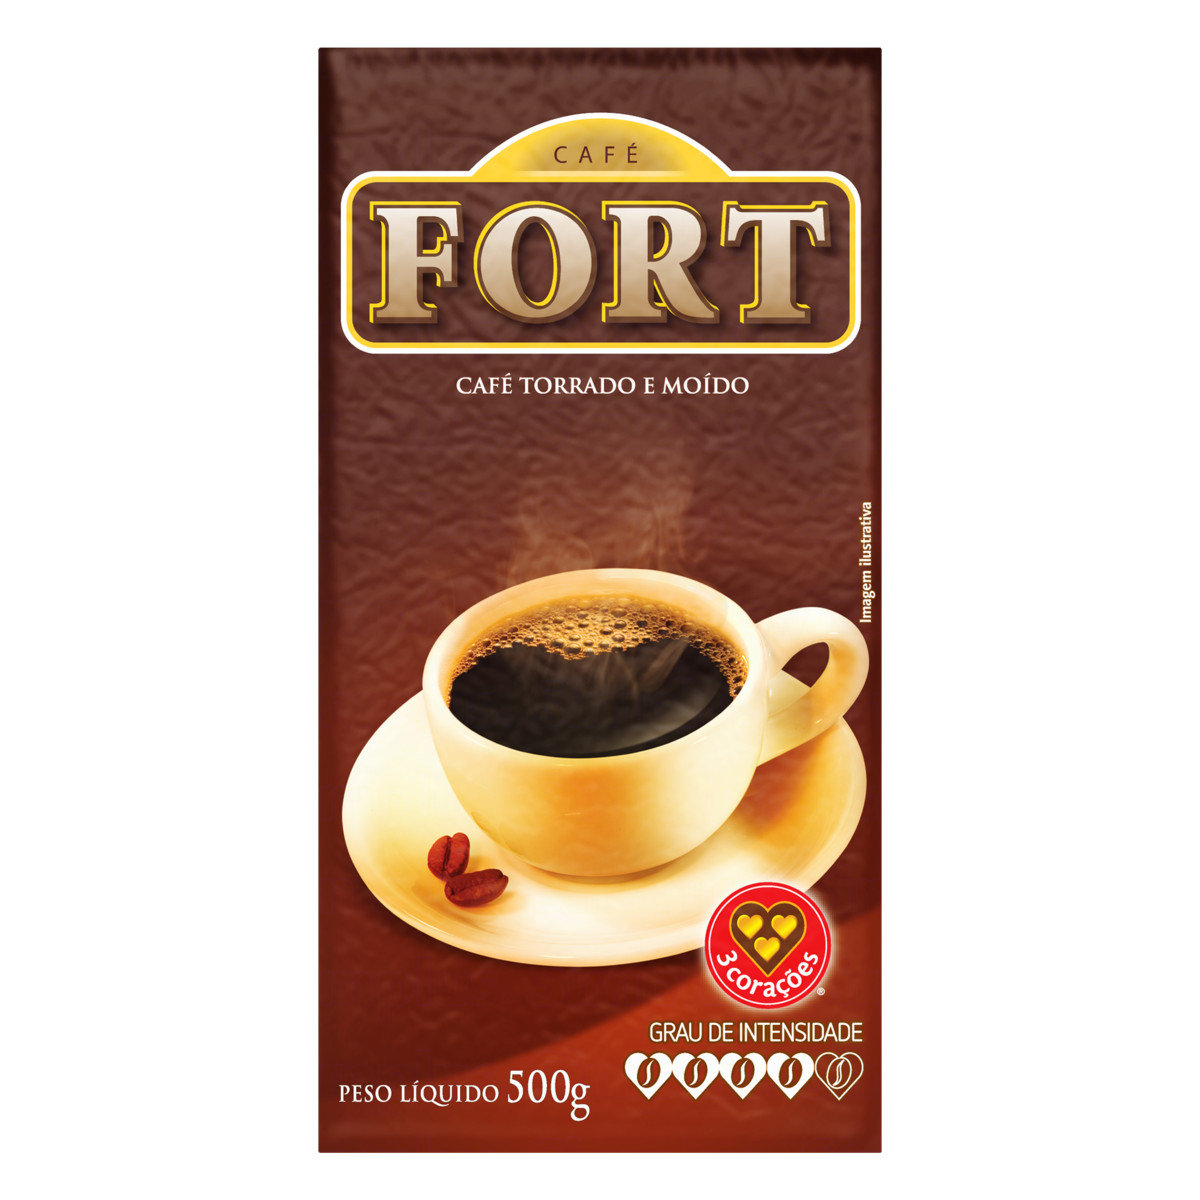 7896045102419 - CAFE 3 CORACOES FORT 500G A VACUO